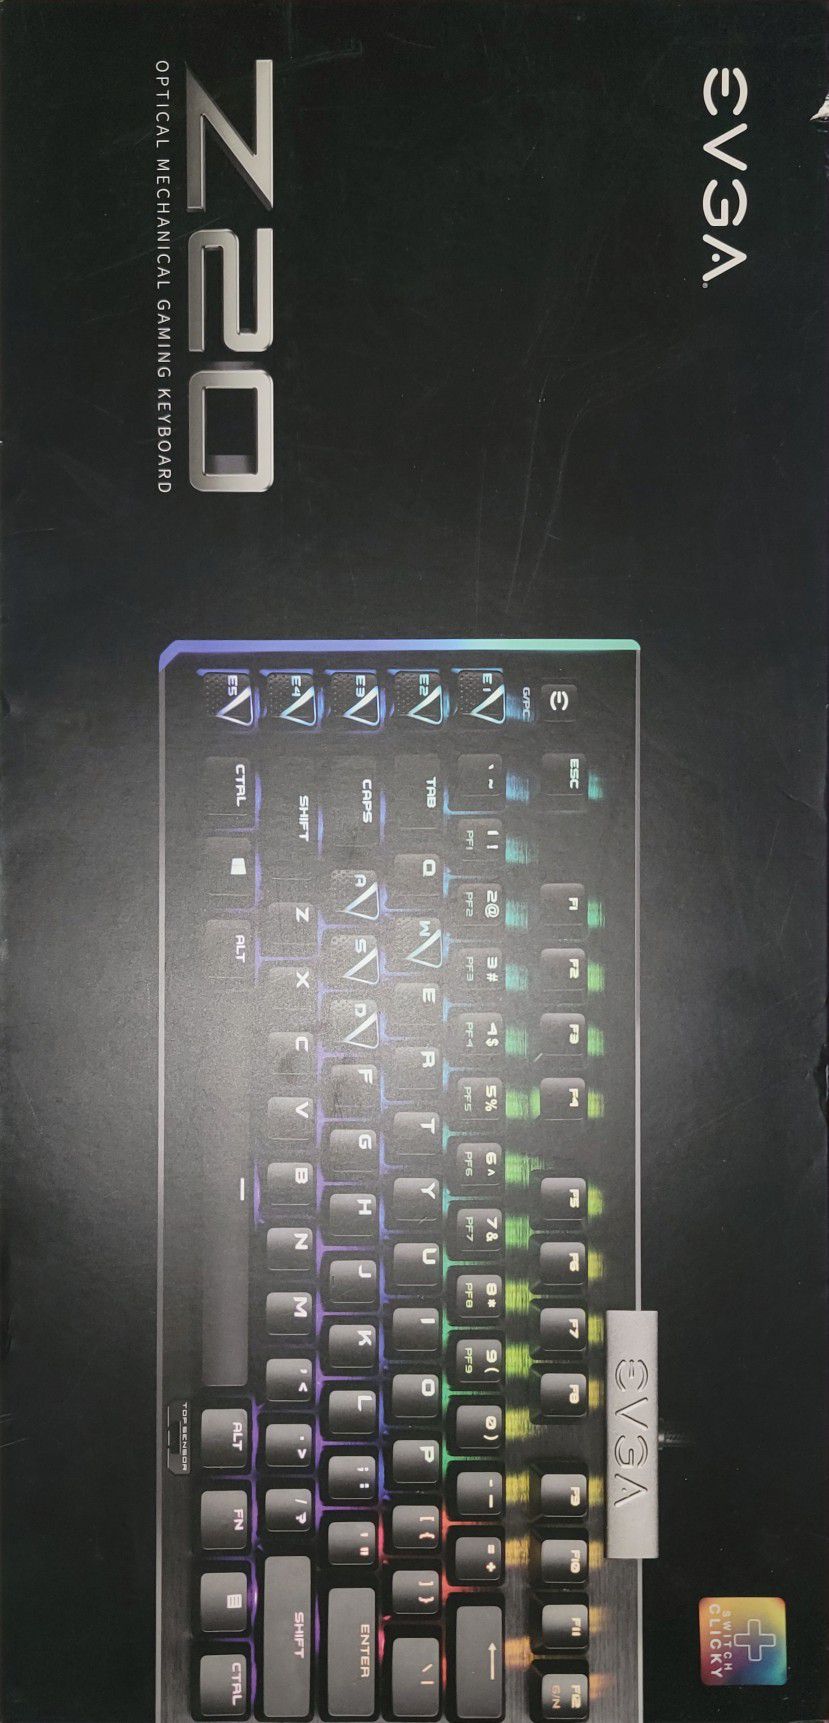 EVGA Z20 RGB Optical Mechanical (Clicky Switch) Gaming Keyboard - New in Box